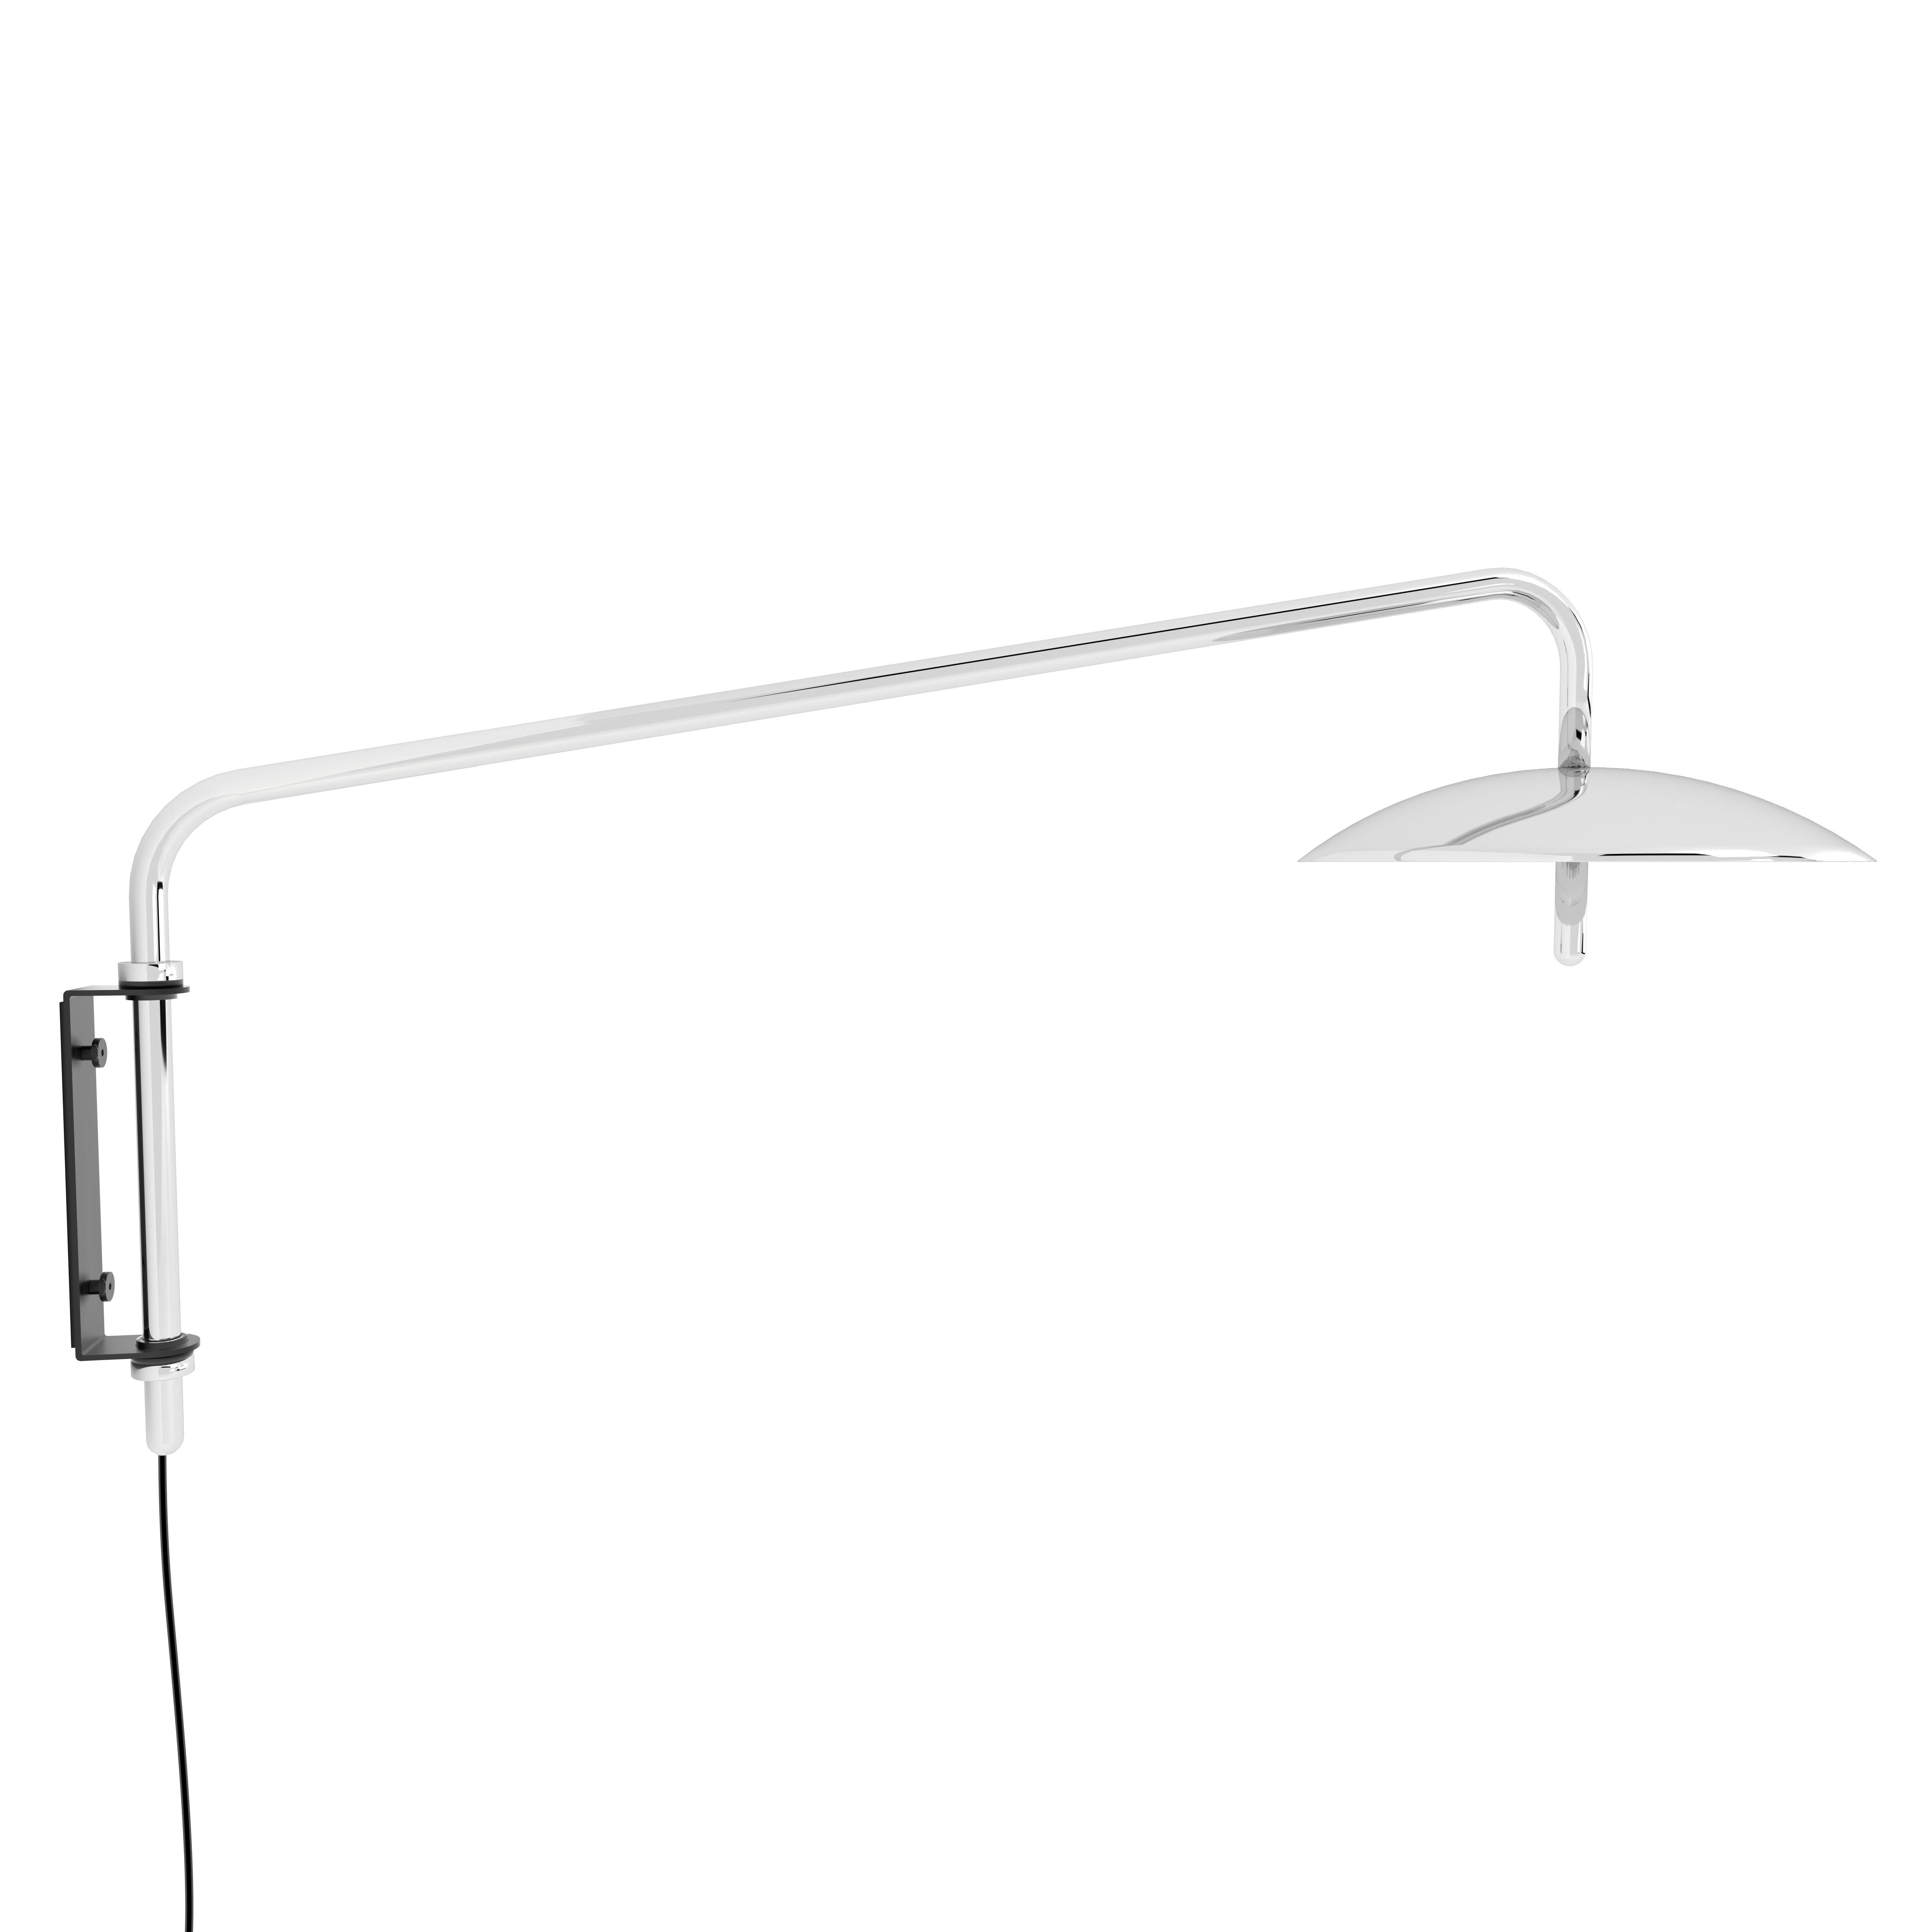 The signal arm sconce is a rotatable sconce that seamlessly blend the Mid-Century Modern aesthetic with that of science fiction. A bent aluminium tube cantilevers from a wall-mounted bracket to allow the spun shade to hover above any interior.